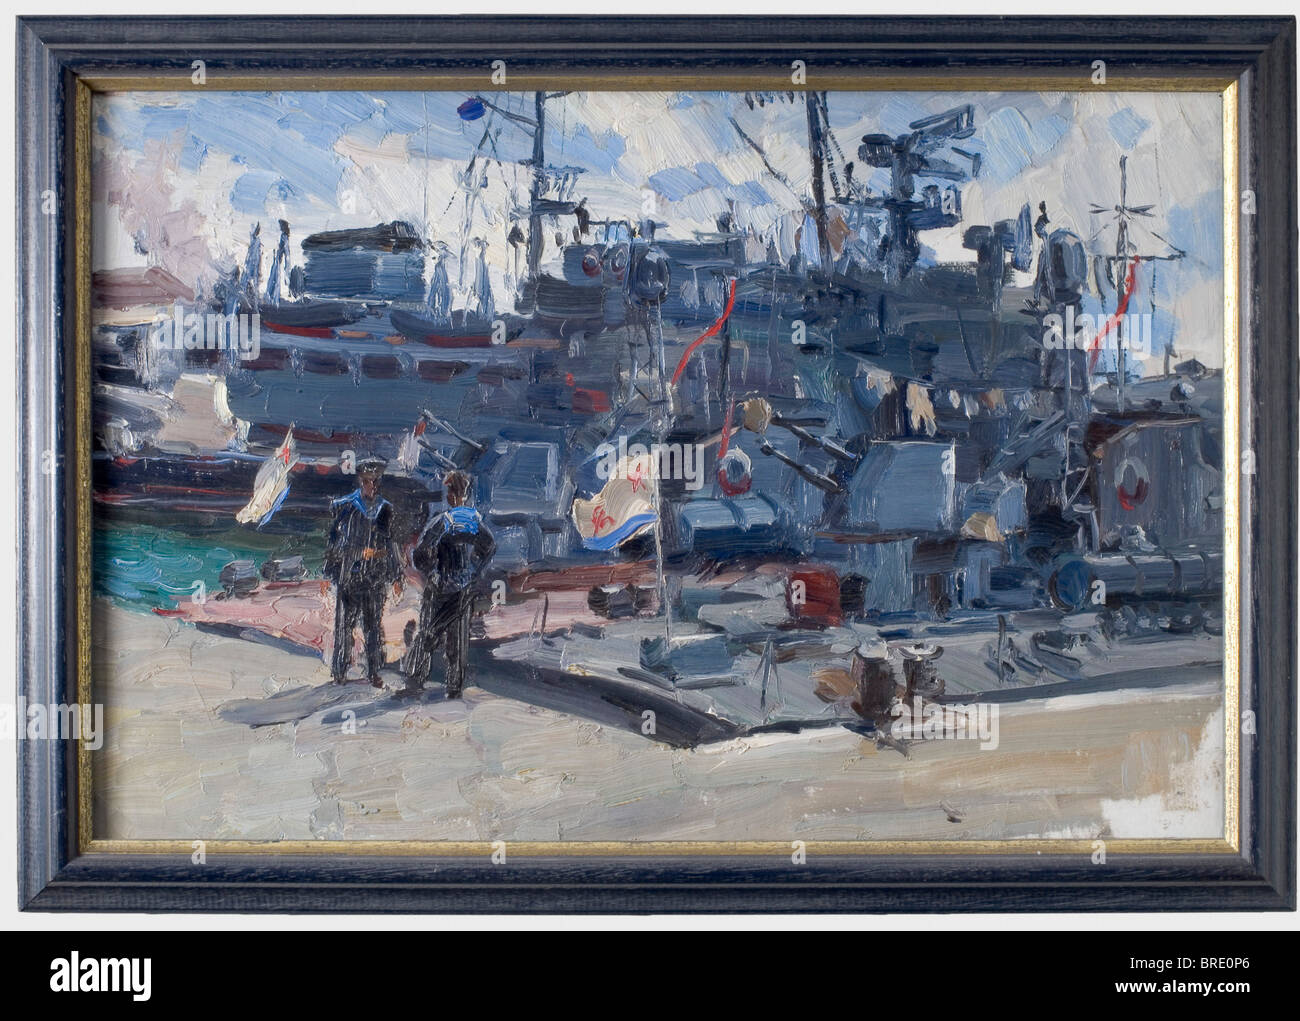 A warship in Poti, S. Antonov, 1970s Oil on fine canvas and pasteboard, unsigned. Soviet export permit stamp and the hand-written painter's inscription on the back. Dimensions 33 x 49.5 cm, framed. historic, historical, people, 20th century, painting, paintings, fine arts, art, illustration, object, objects, stills, clipping, clippings, cut out, cut-out, cut-outs, Stock Photo